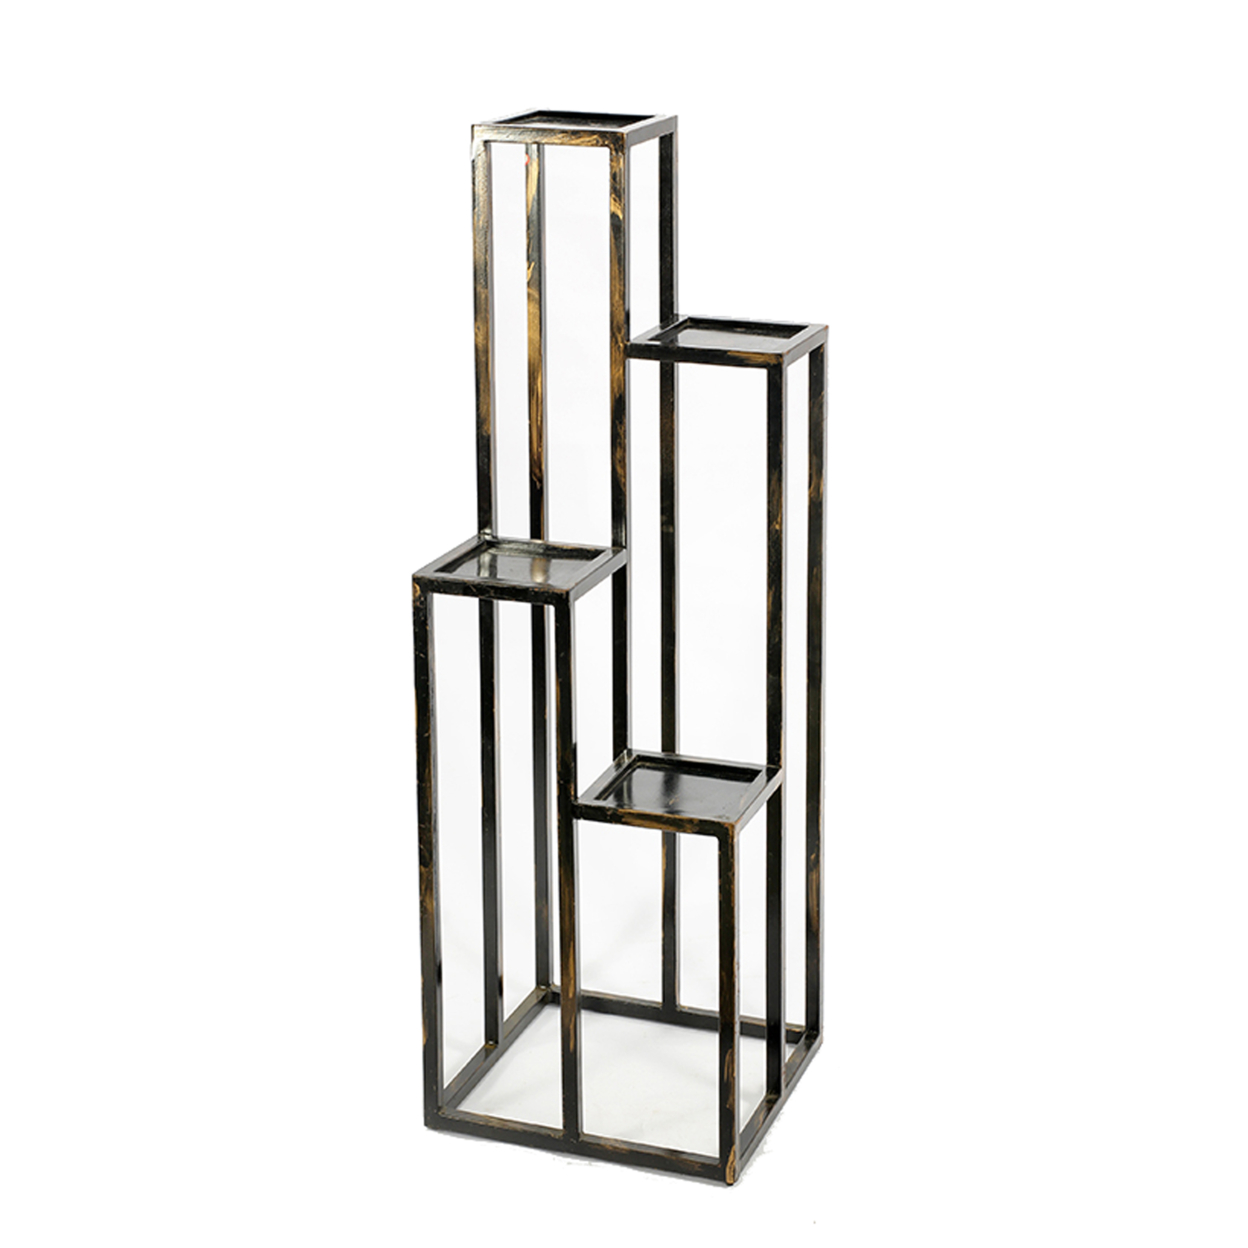 4 Tier Cast Iron Frame Plant Stand With Tubular Legs, Black And Gold- Saltoro Sherpi